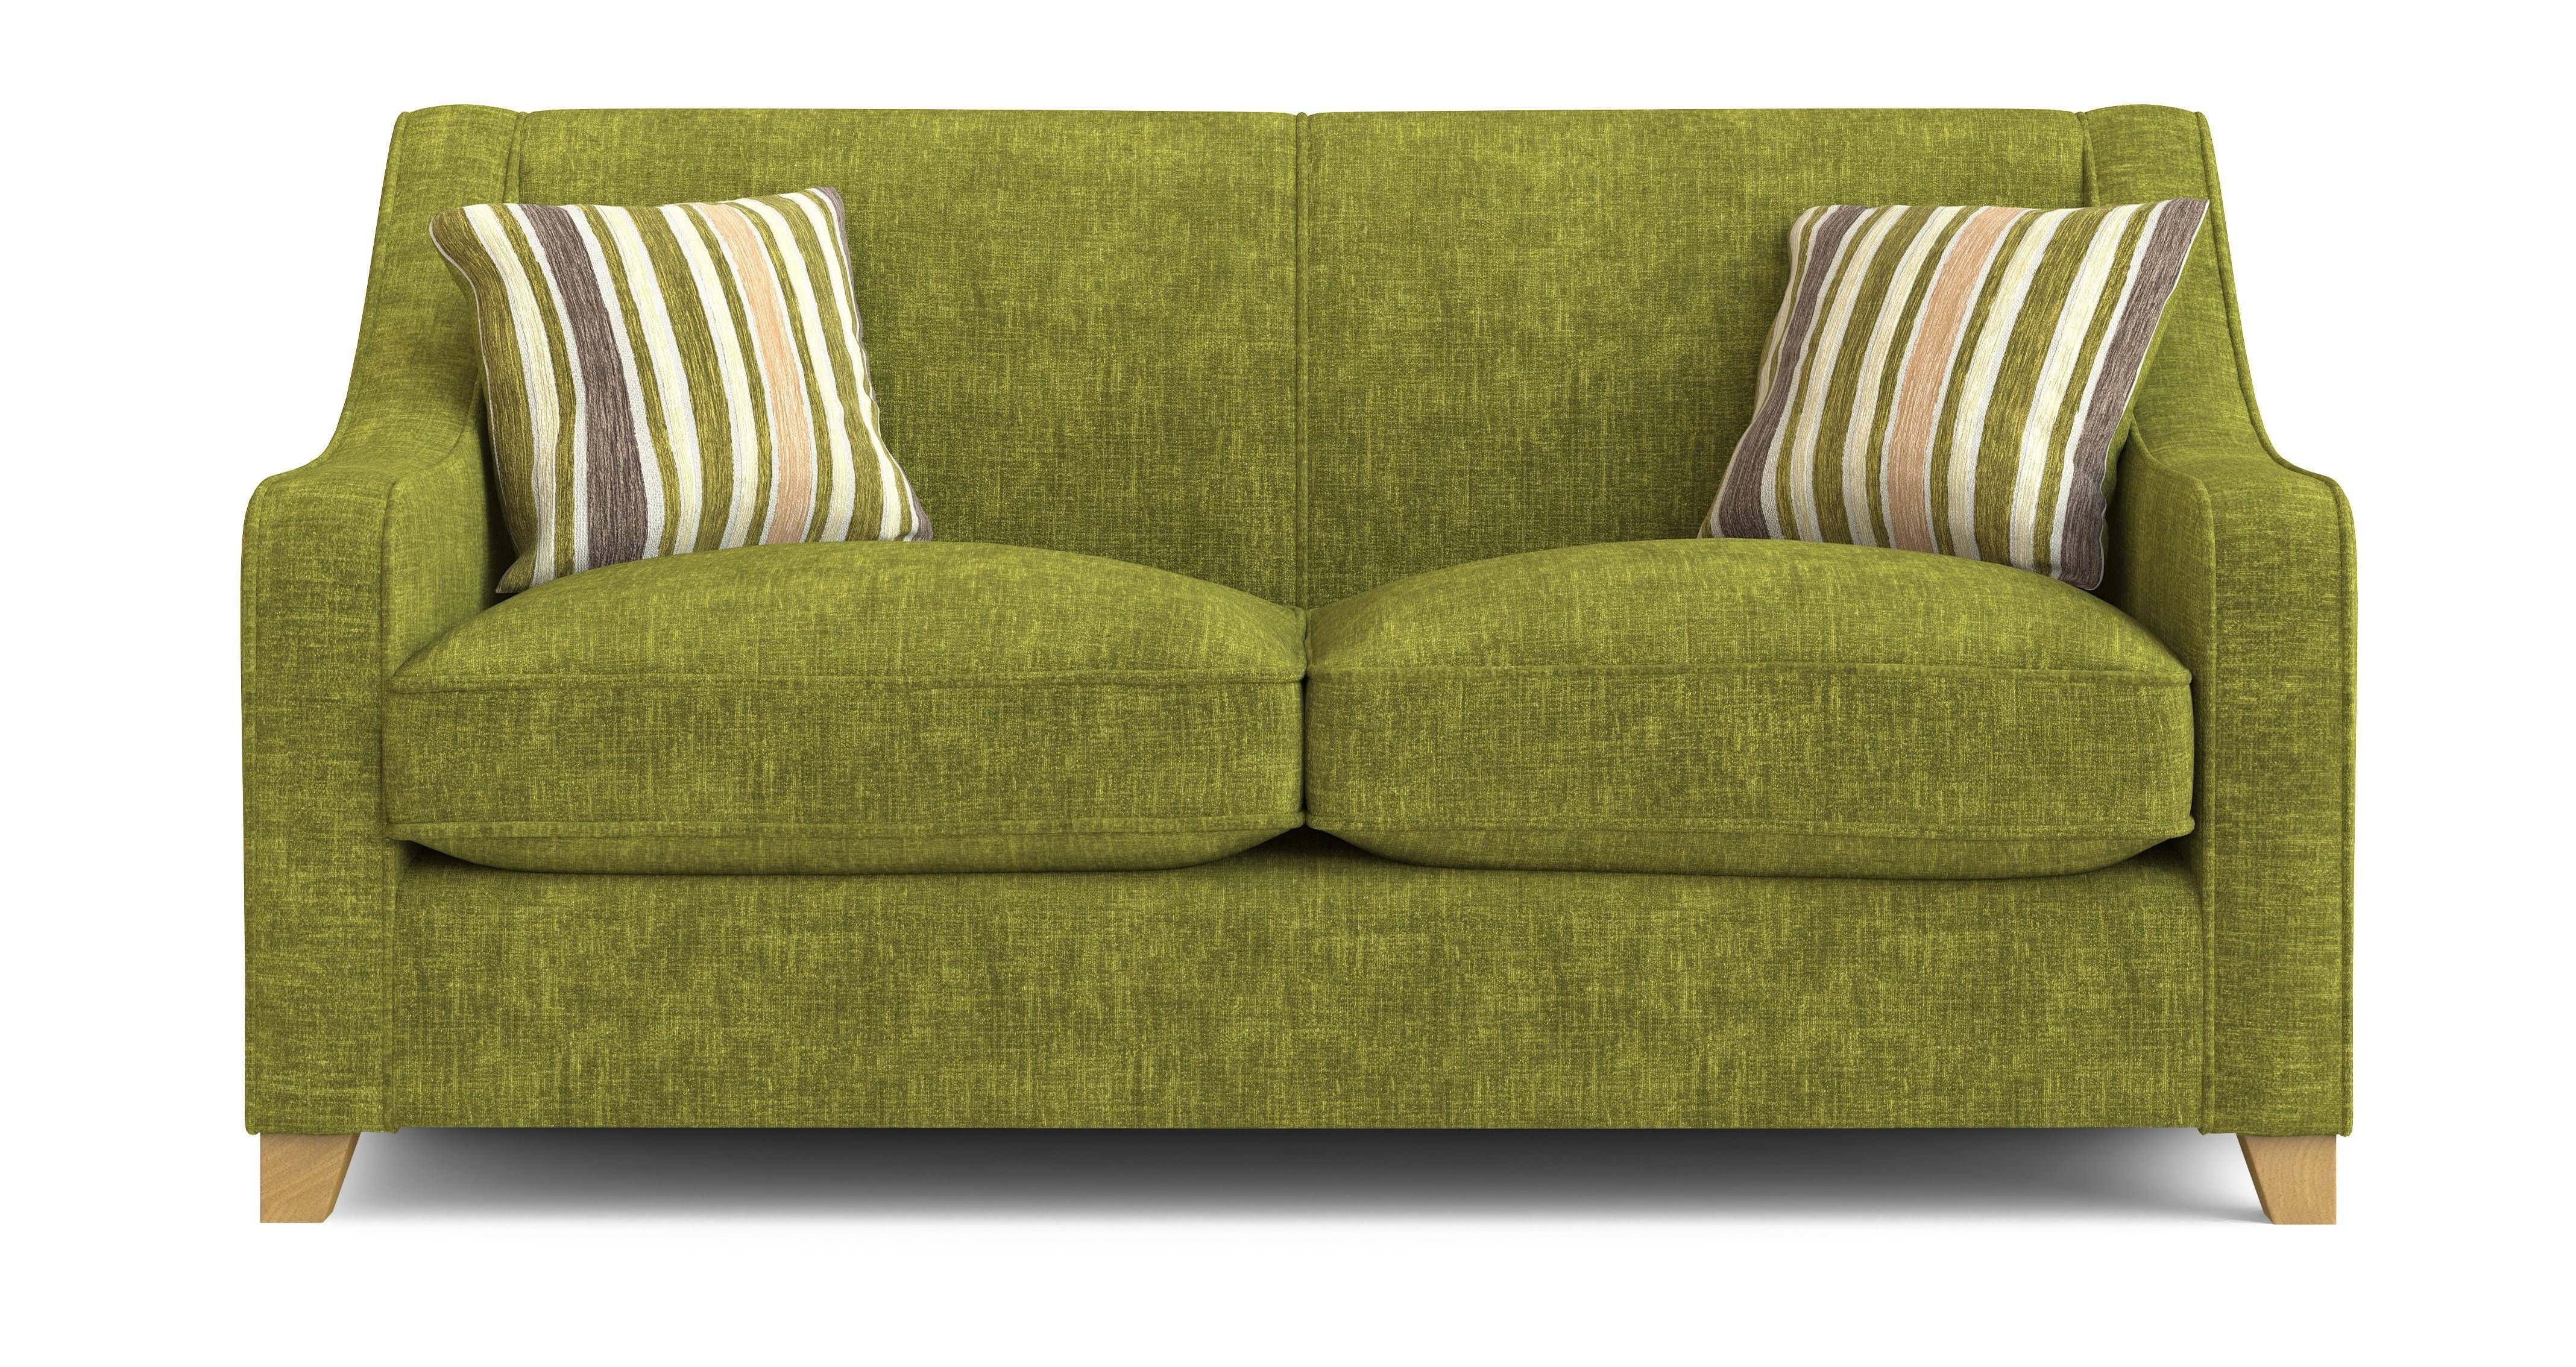 green two seater sofa bed